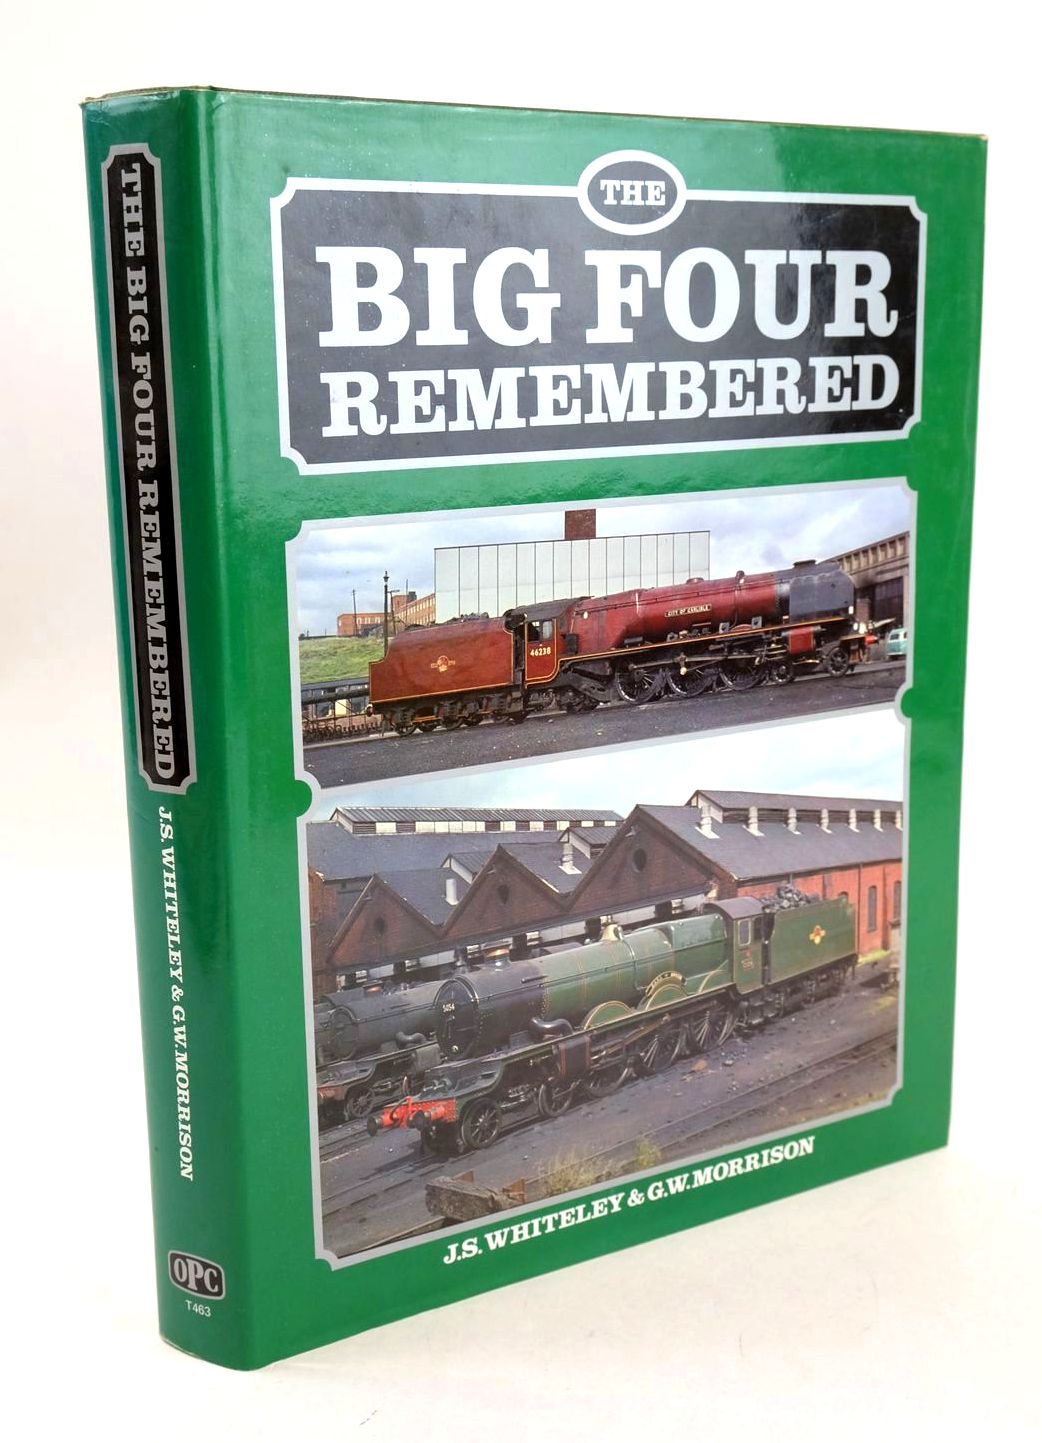 Photo of THE BIG FOUR REMEMBERED written by Whiteley, J.S. Morrison, G.W. published by Haynes, Oxford Publishing (STOCK CODE: 1327105)  for sale by Stella & Rose's Books